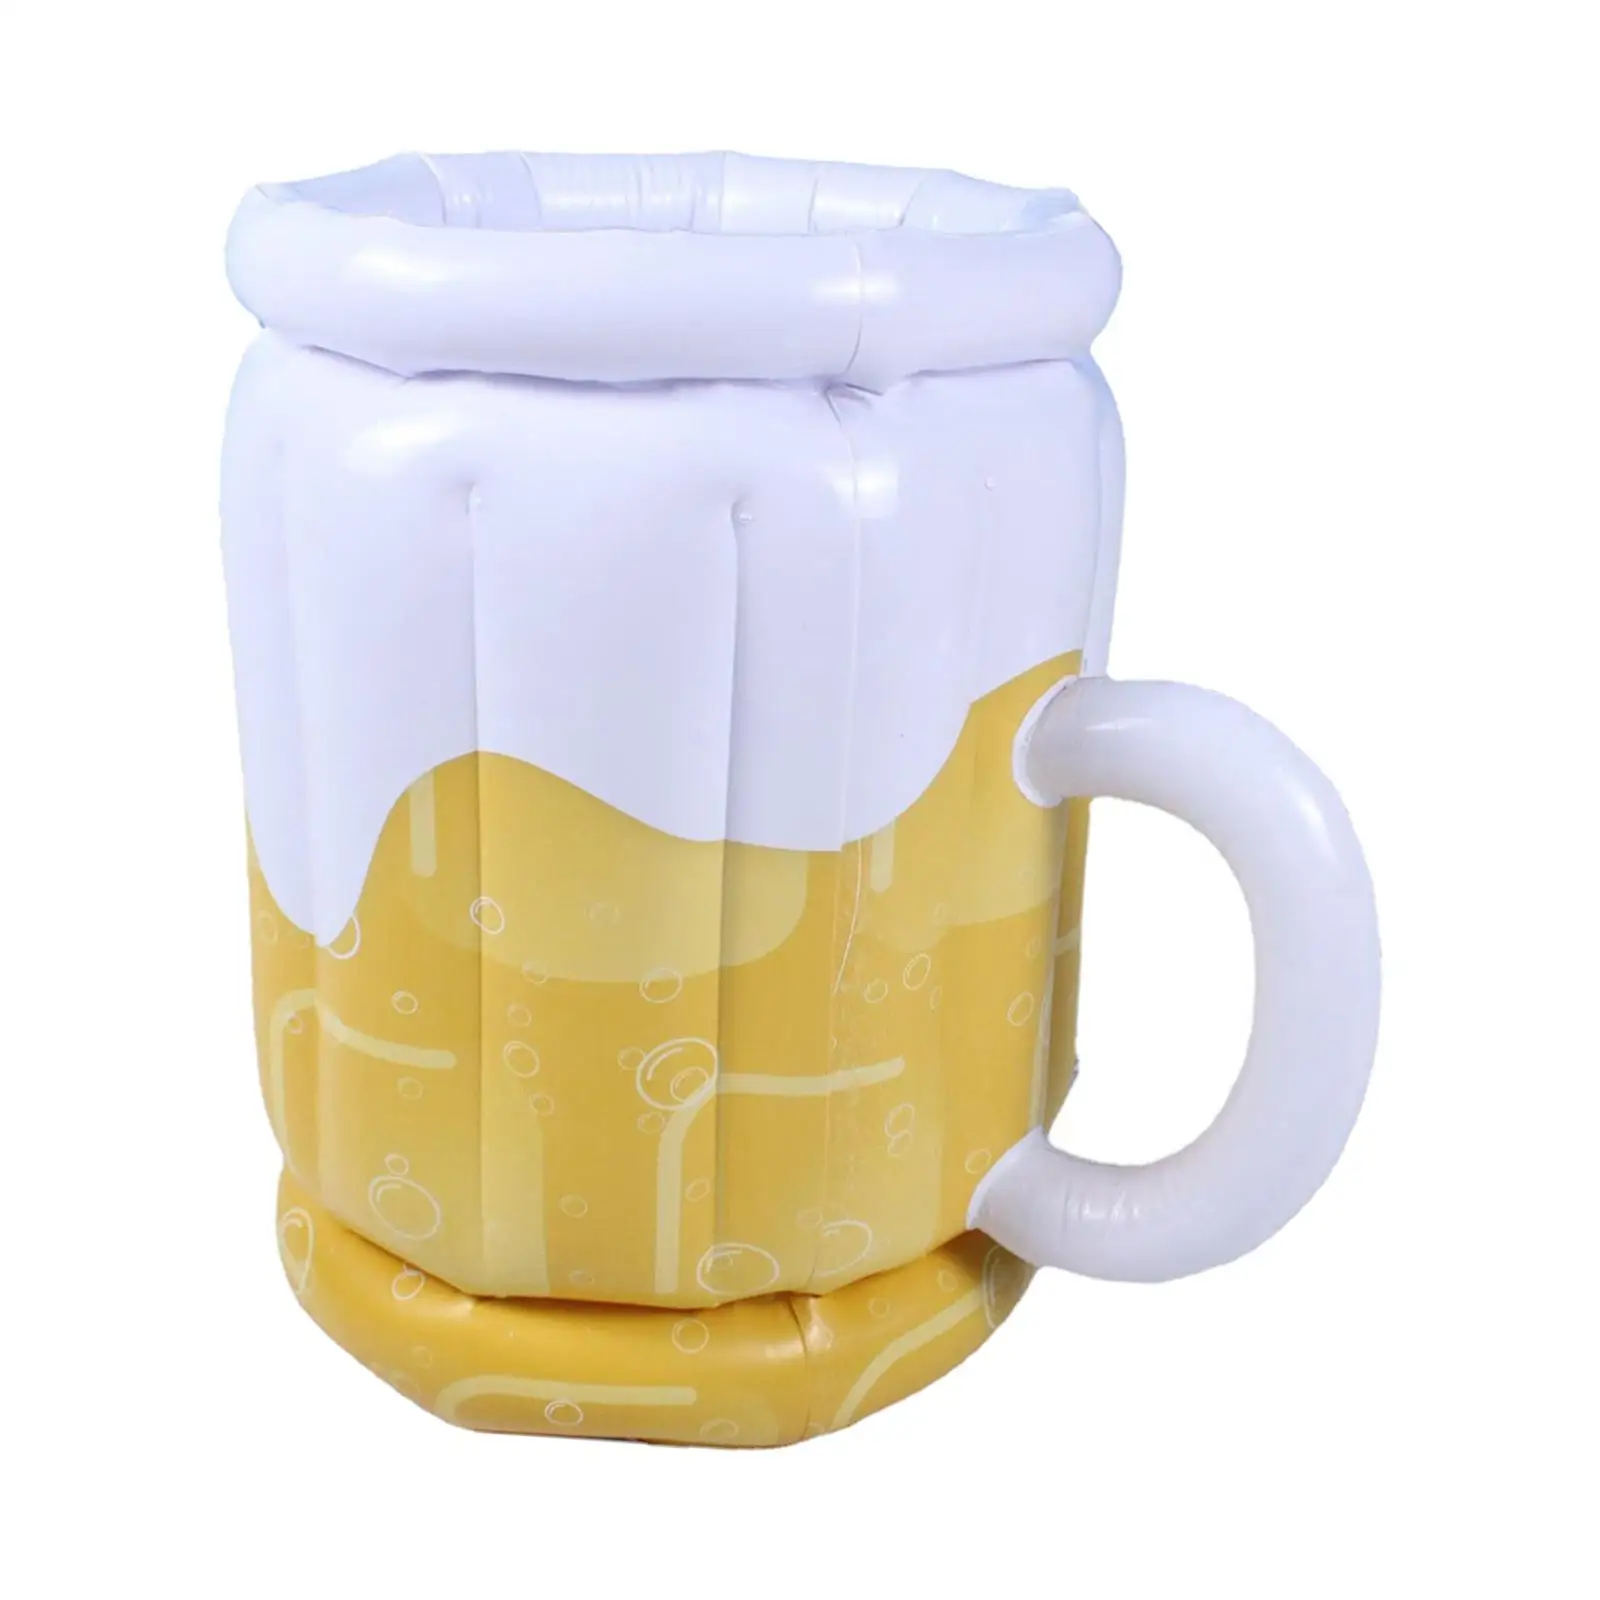 Inflatable Cooler Supplies Beer Mug Cooler Portable Ice Bucket Cooler Drink Cooler for Pool Party Picnic Beach Outdoor Birthday